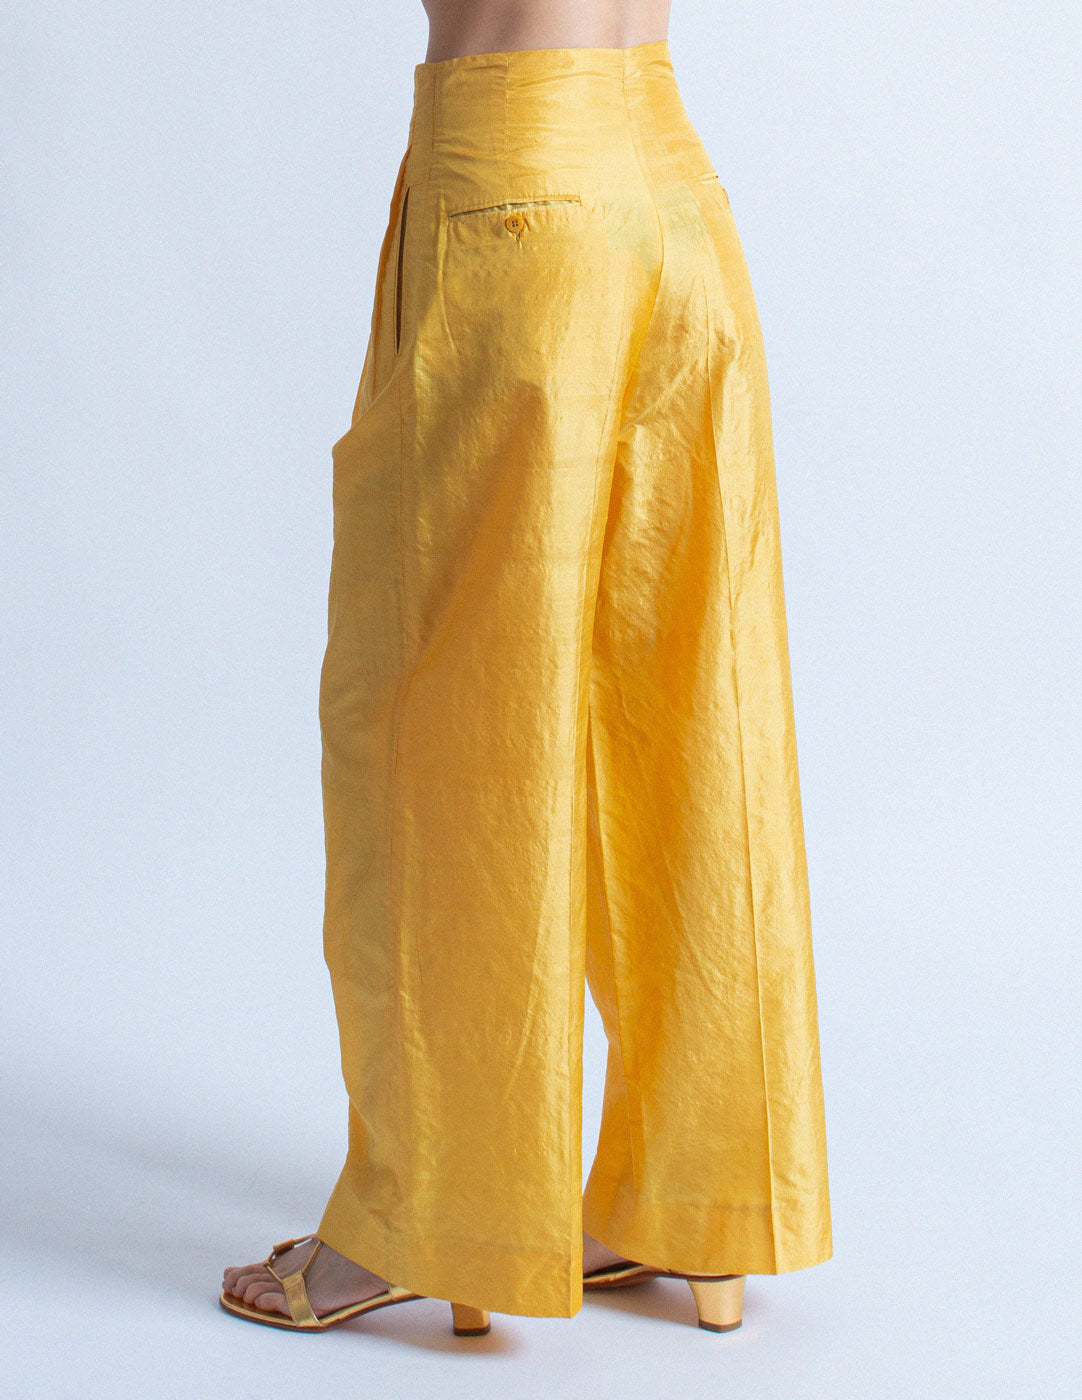 Romeo Gigli vintage marigold high waisted silk trousers back detail